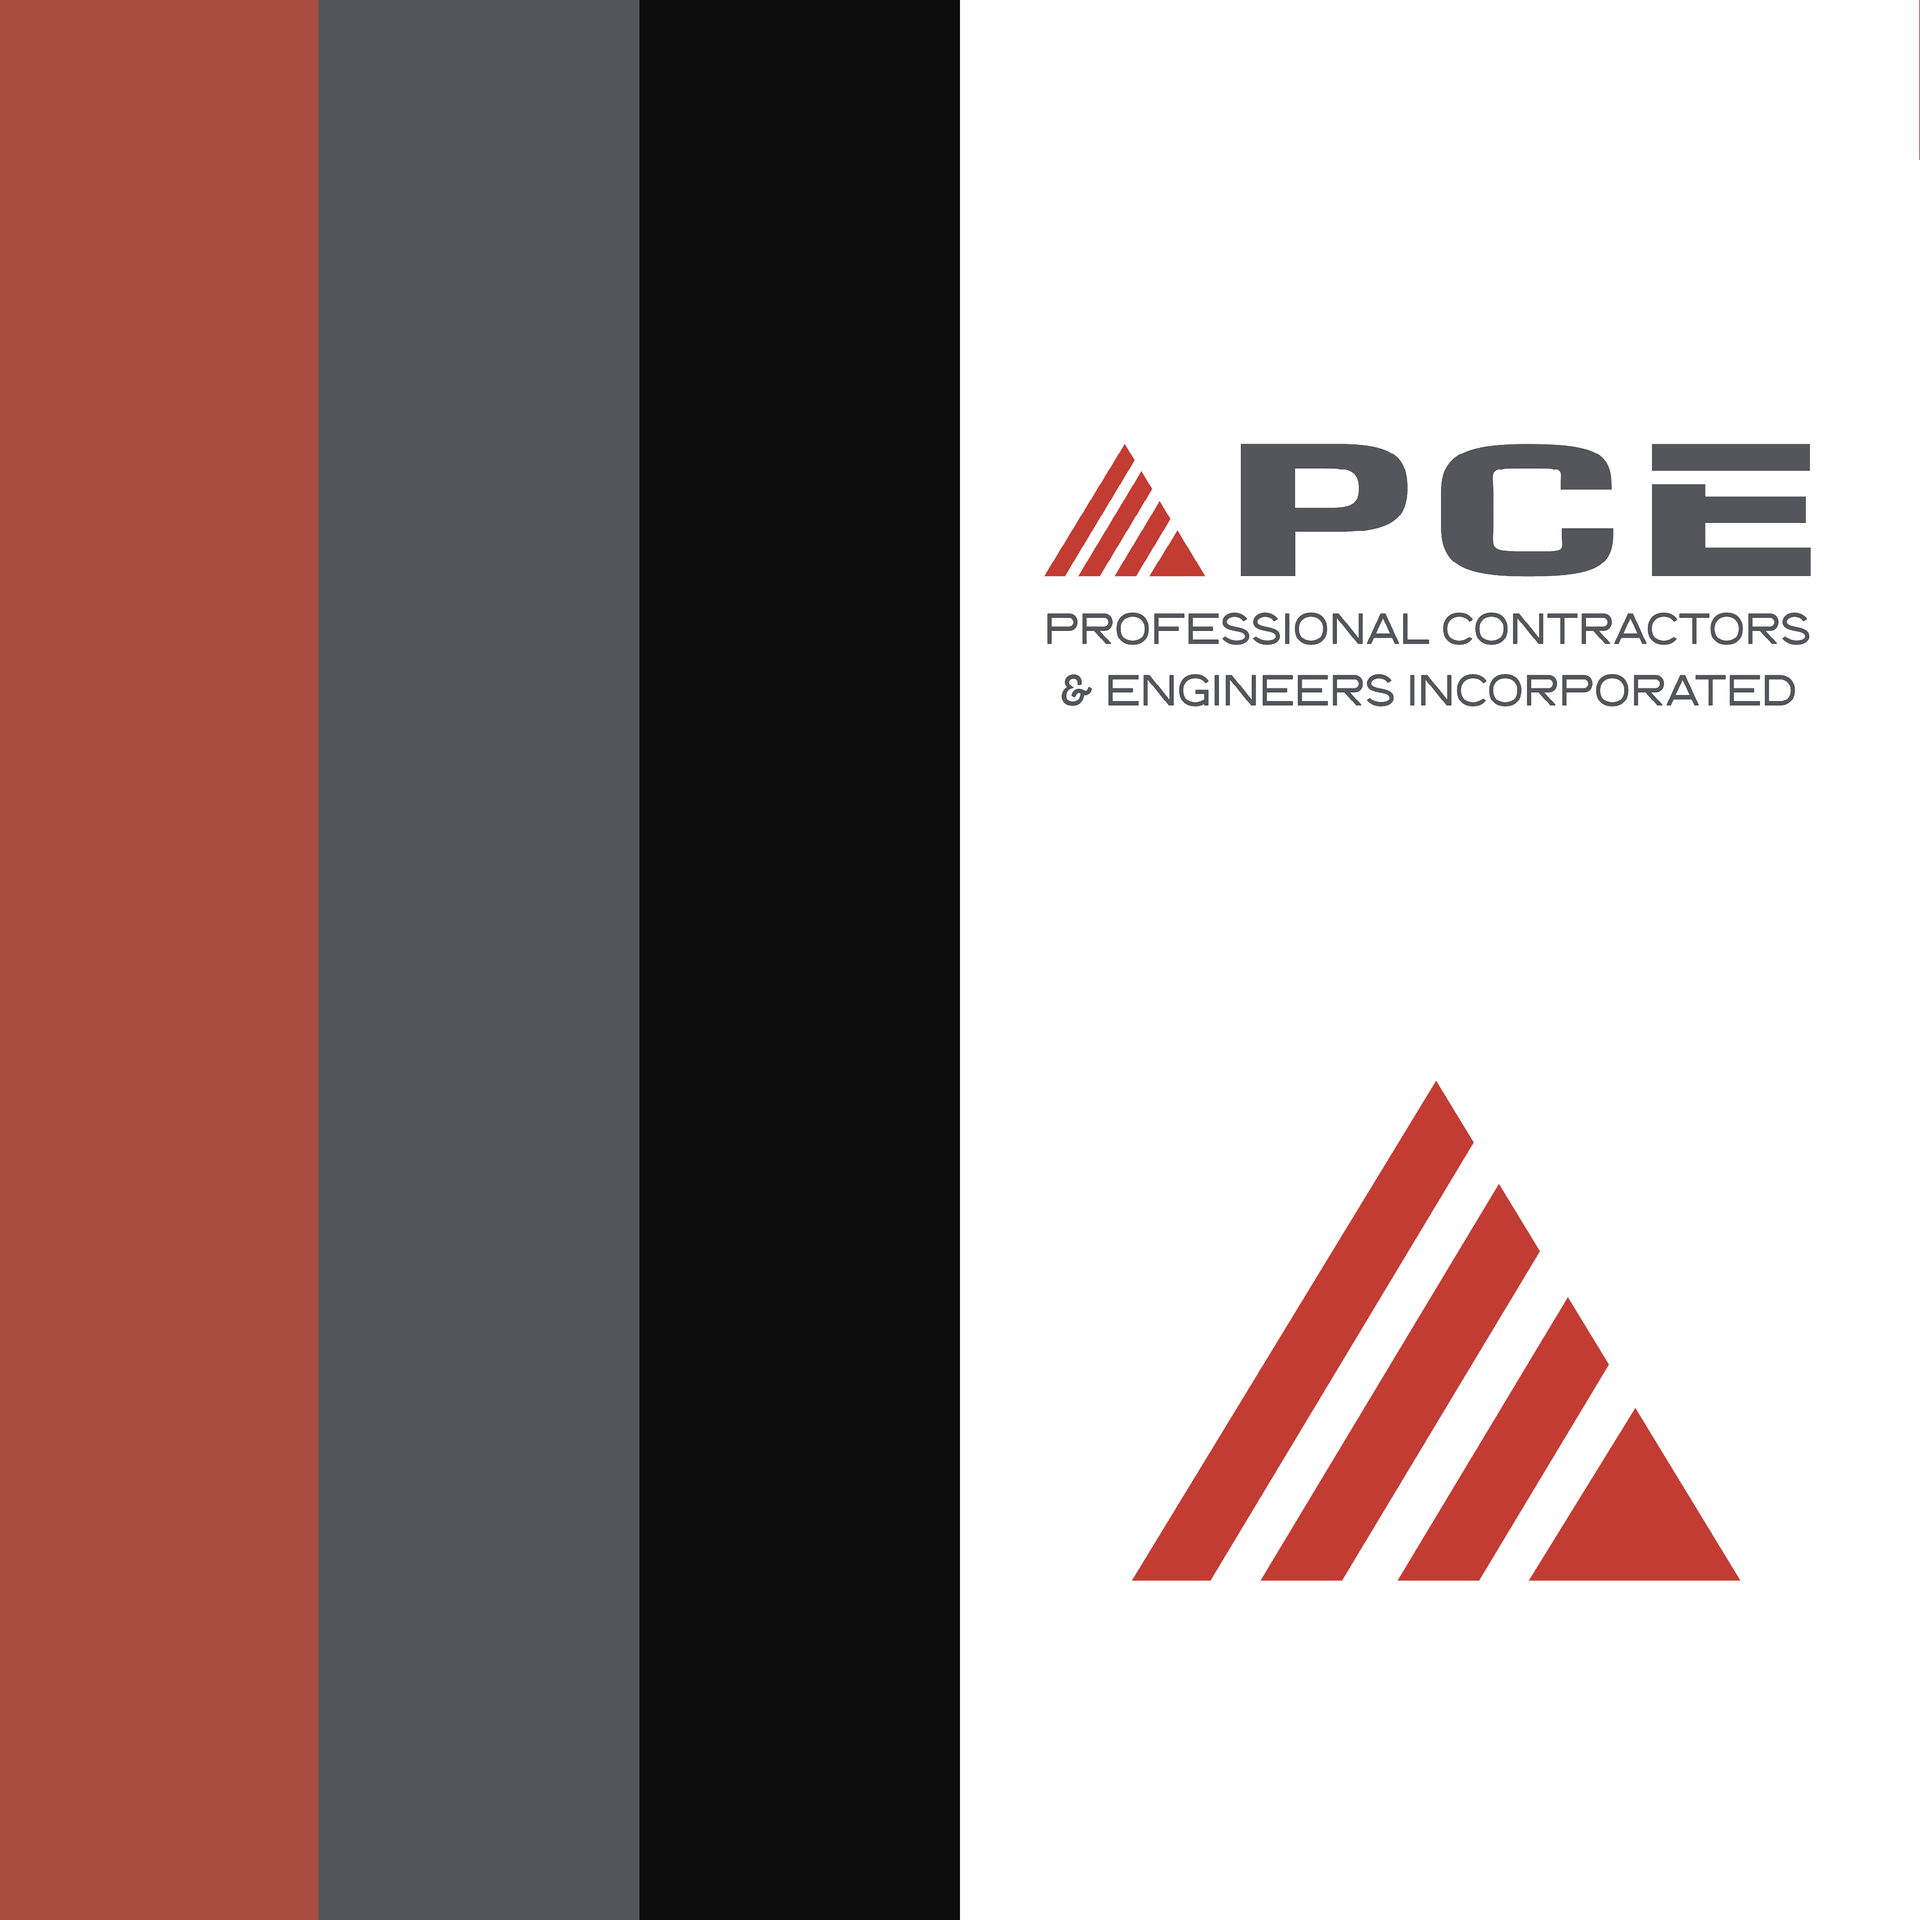 Learn How Lift Division Helped PCE With Their Local SEO Marketing & Design in Mid-Missouri